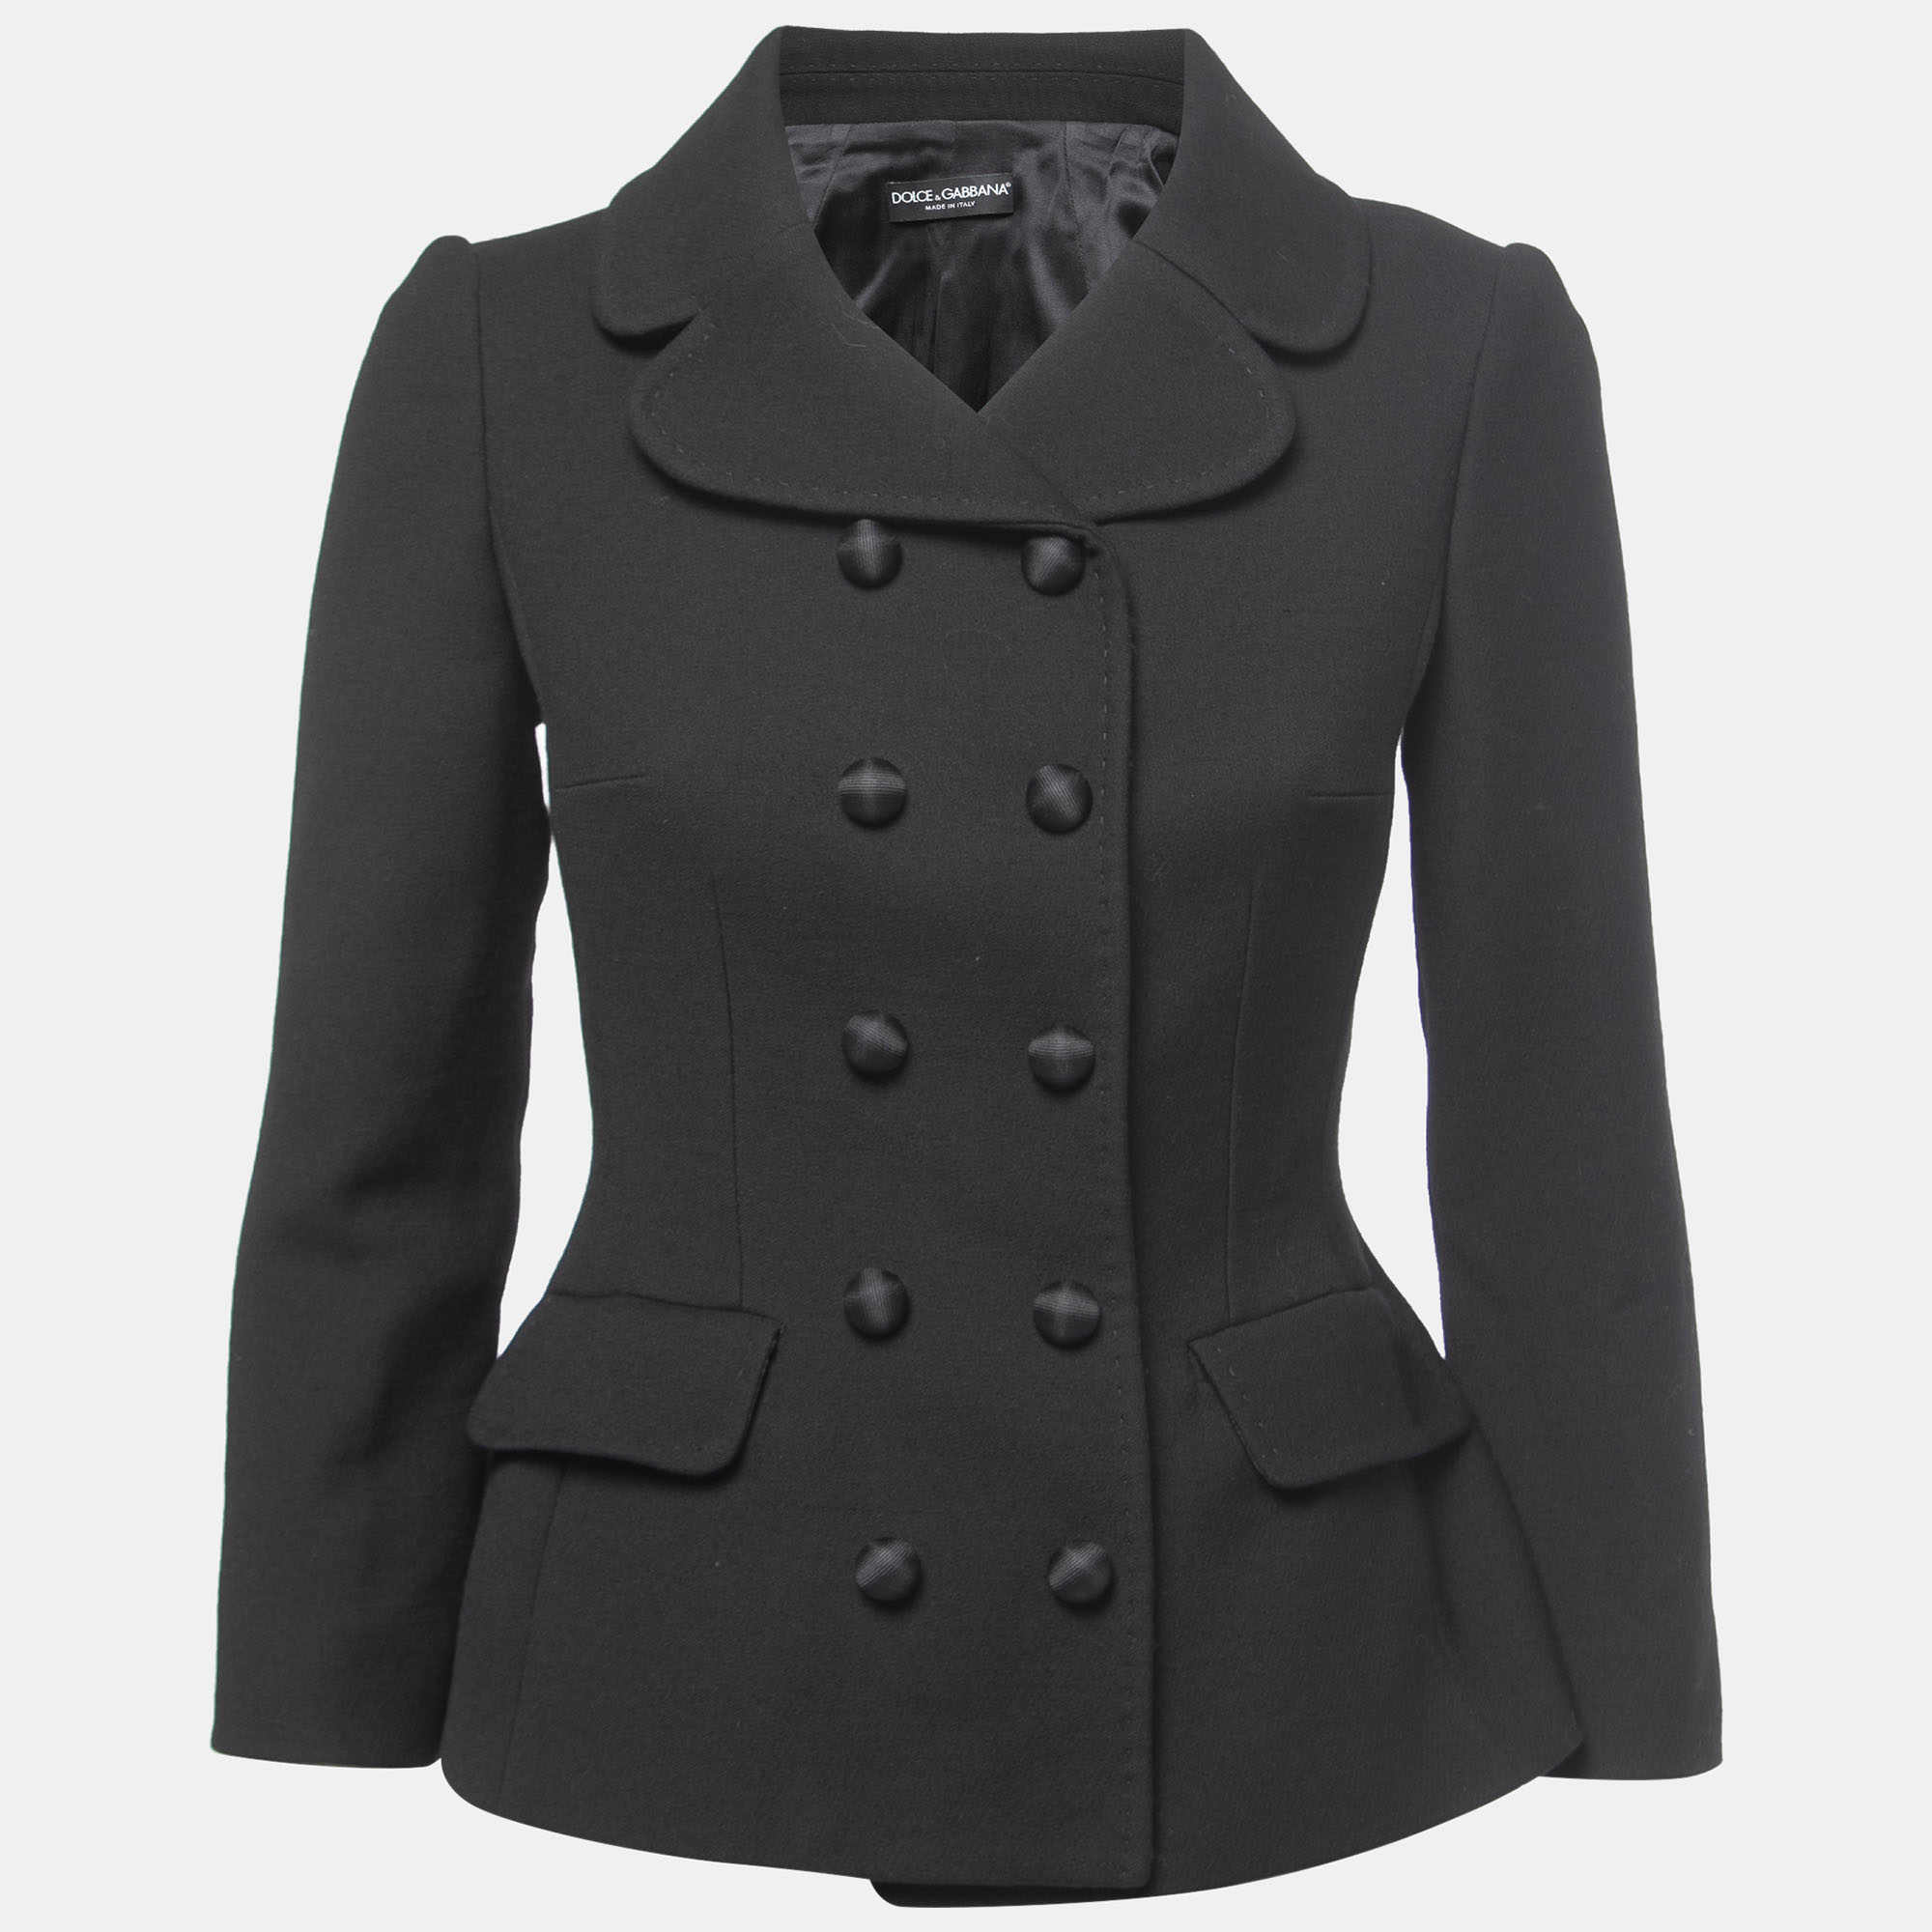 

Dolce & Gabbana Black Wool Tailored Double-Breasted Blazer